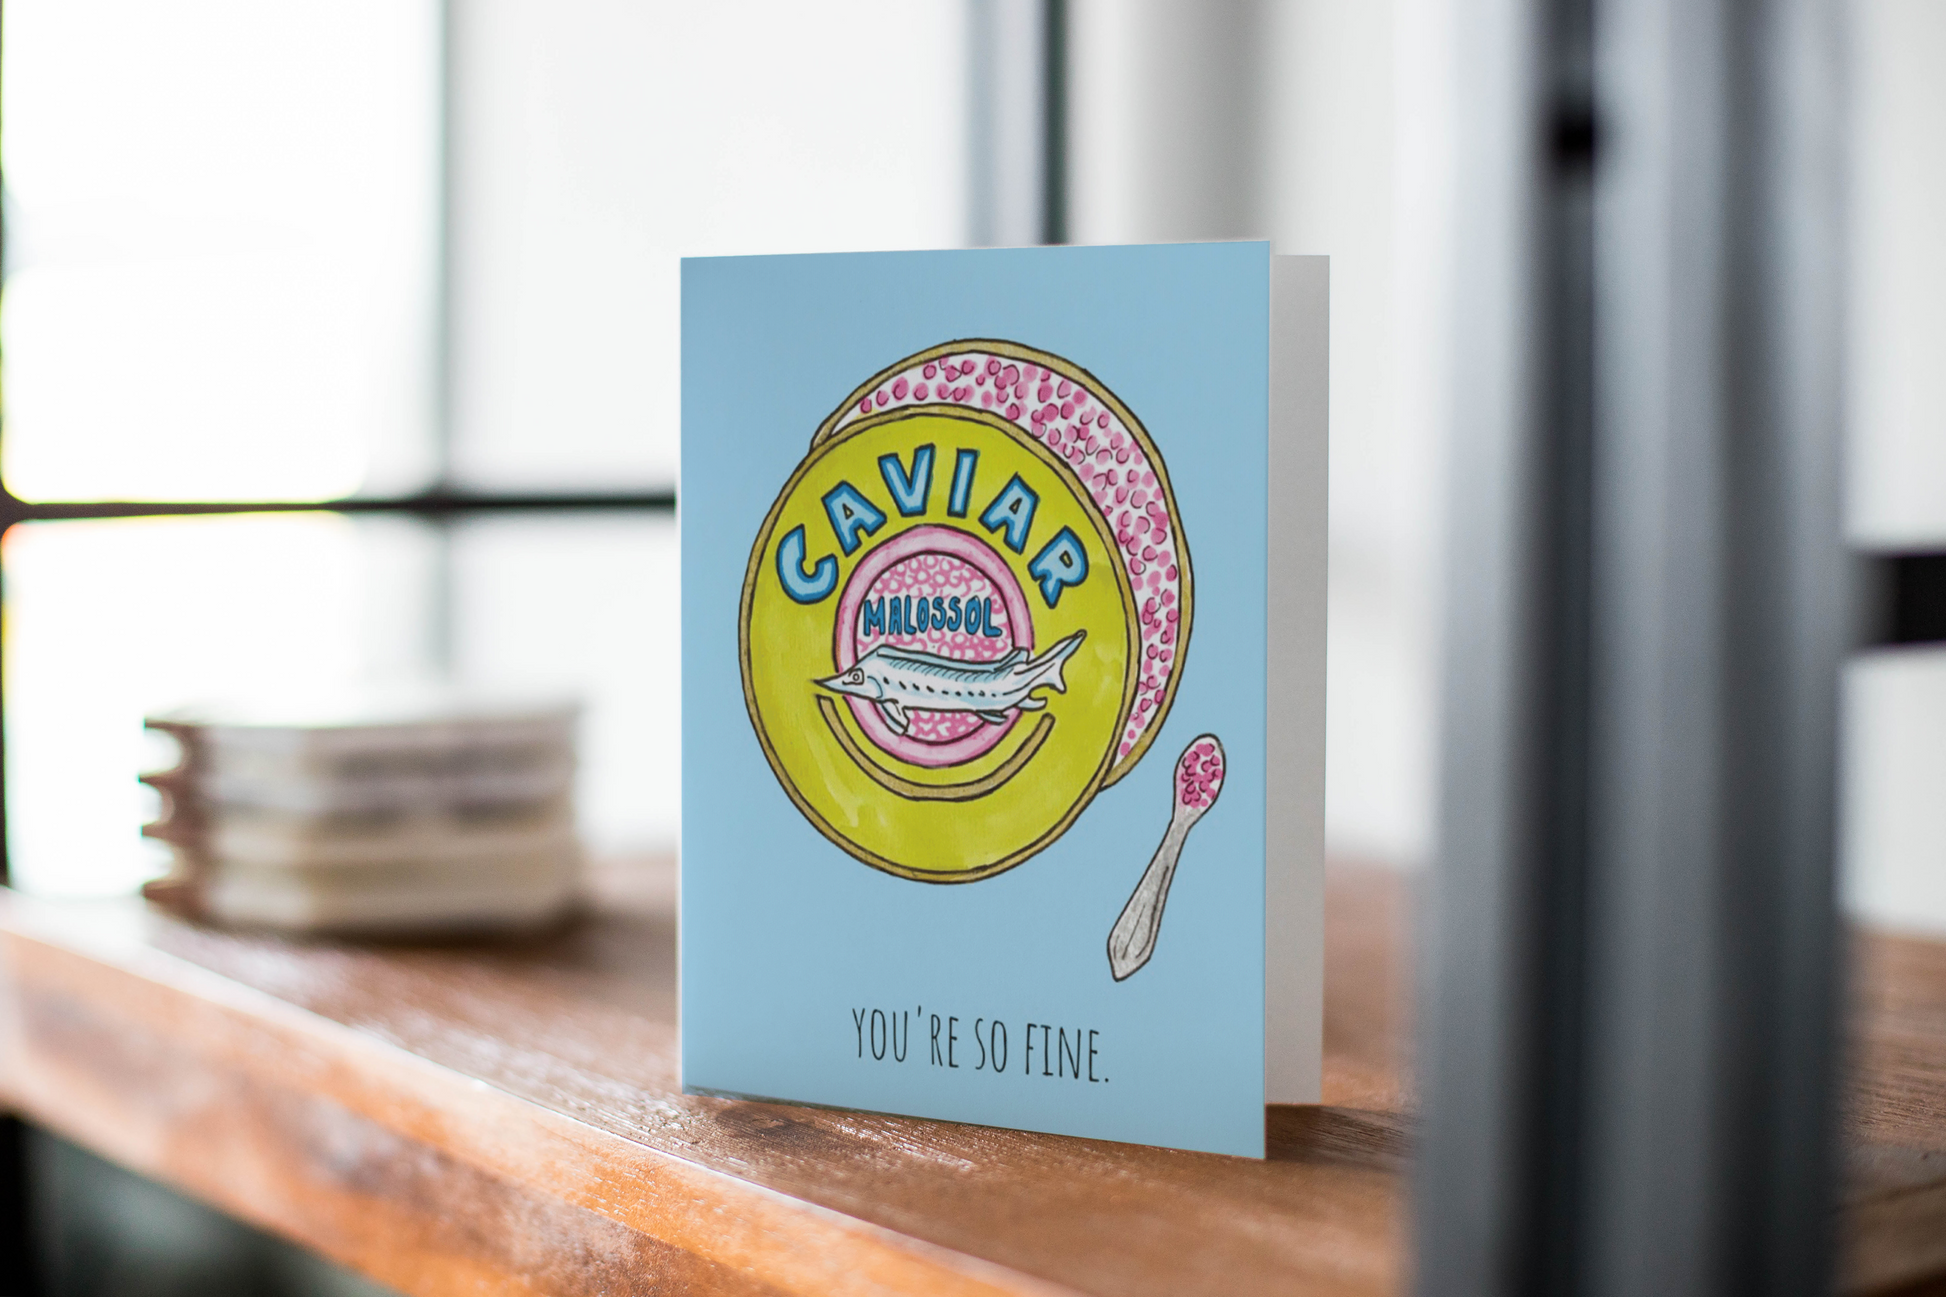 Greeting card featuring illustration of a cute neon caviar tin labeled "Caviar... Malossol" with caviar spoon on side. Additional text on card reads "You're So Fine." on the bottom.